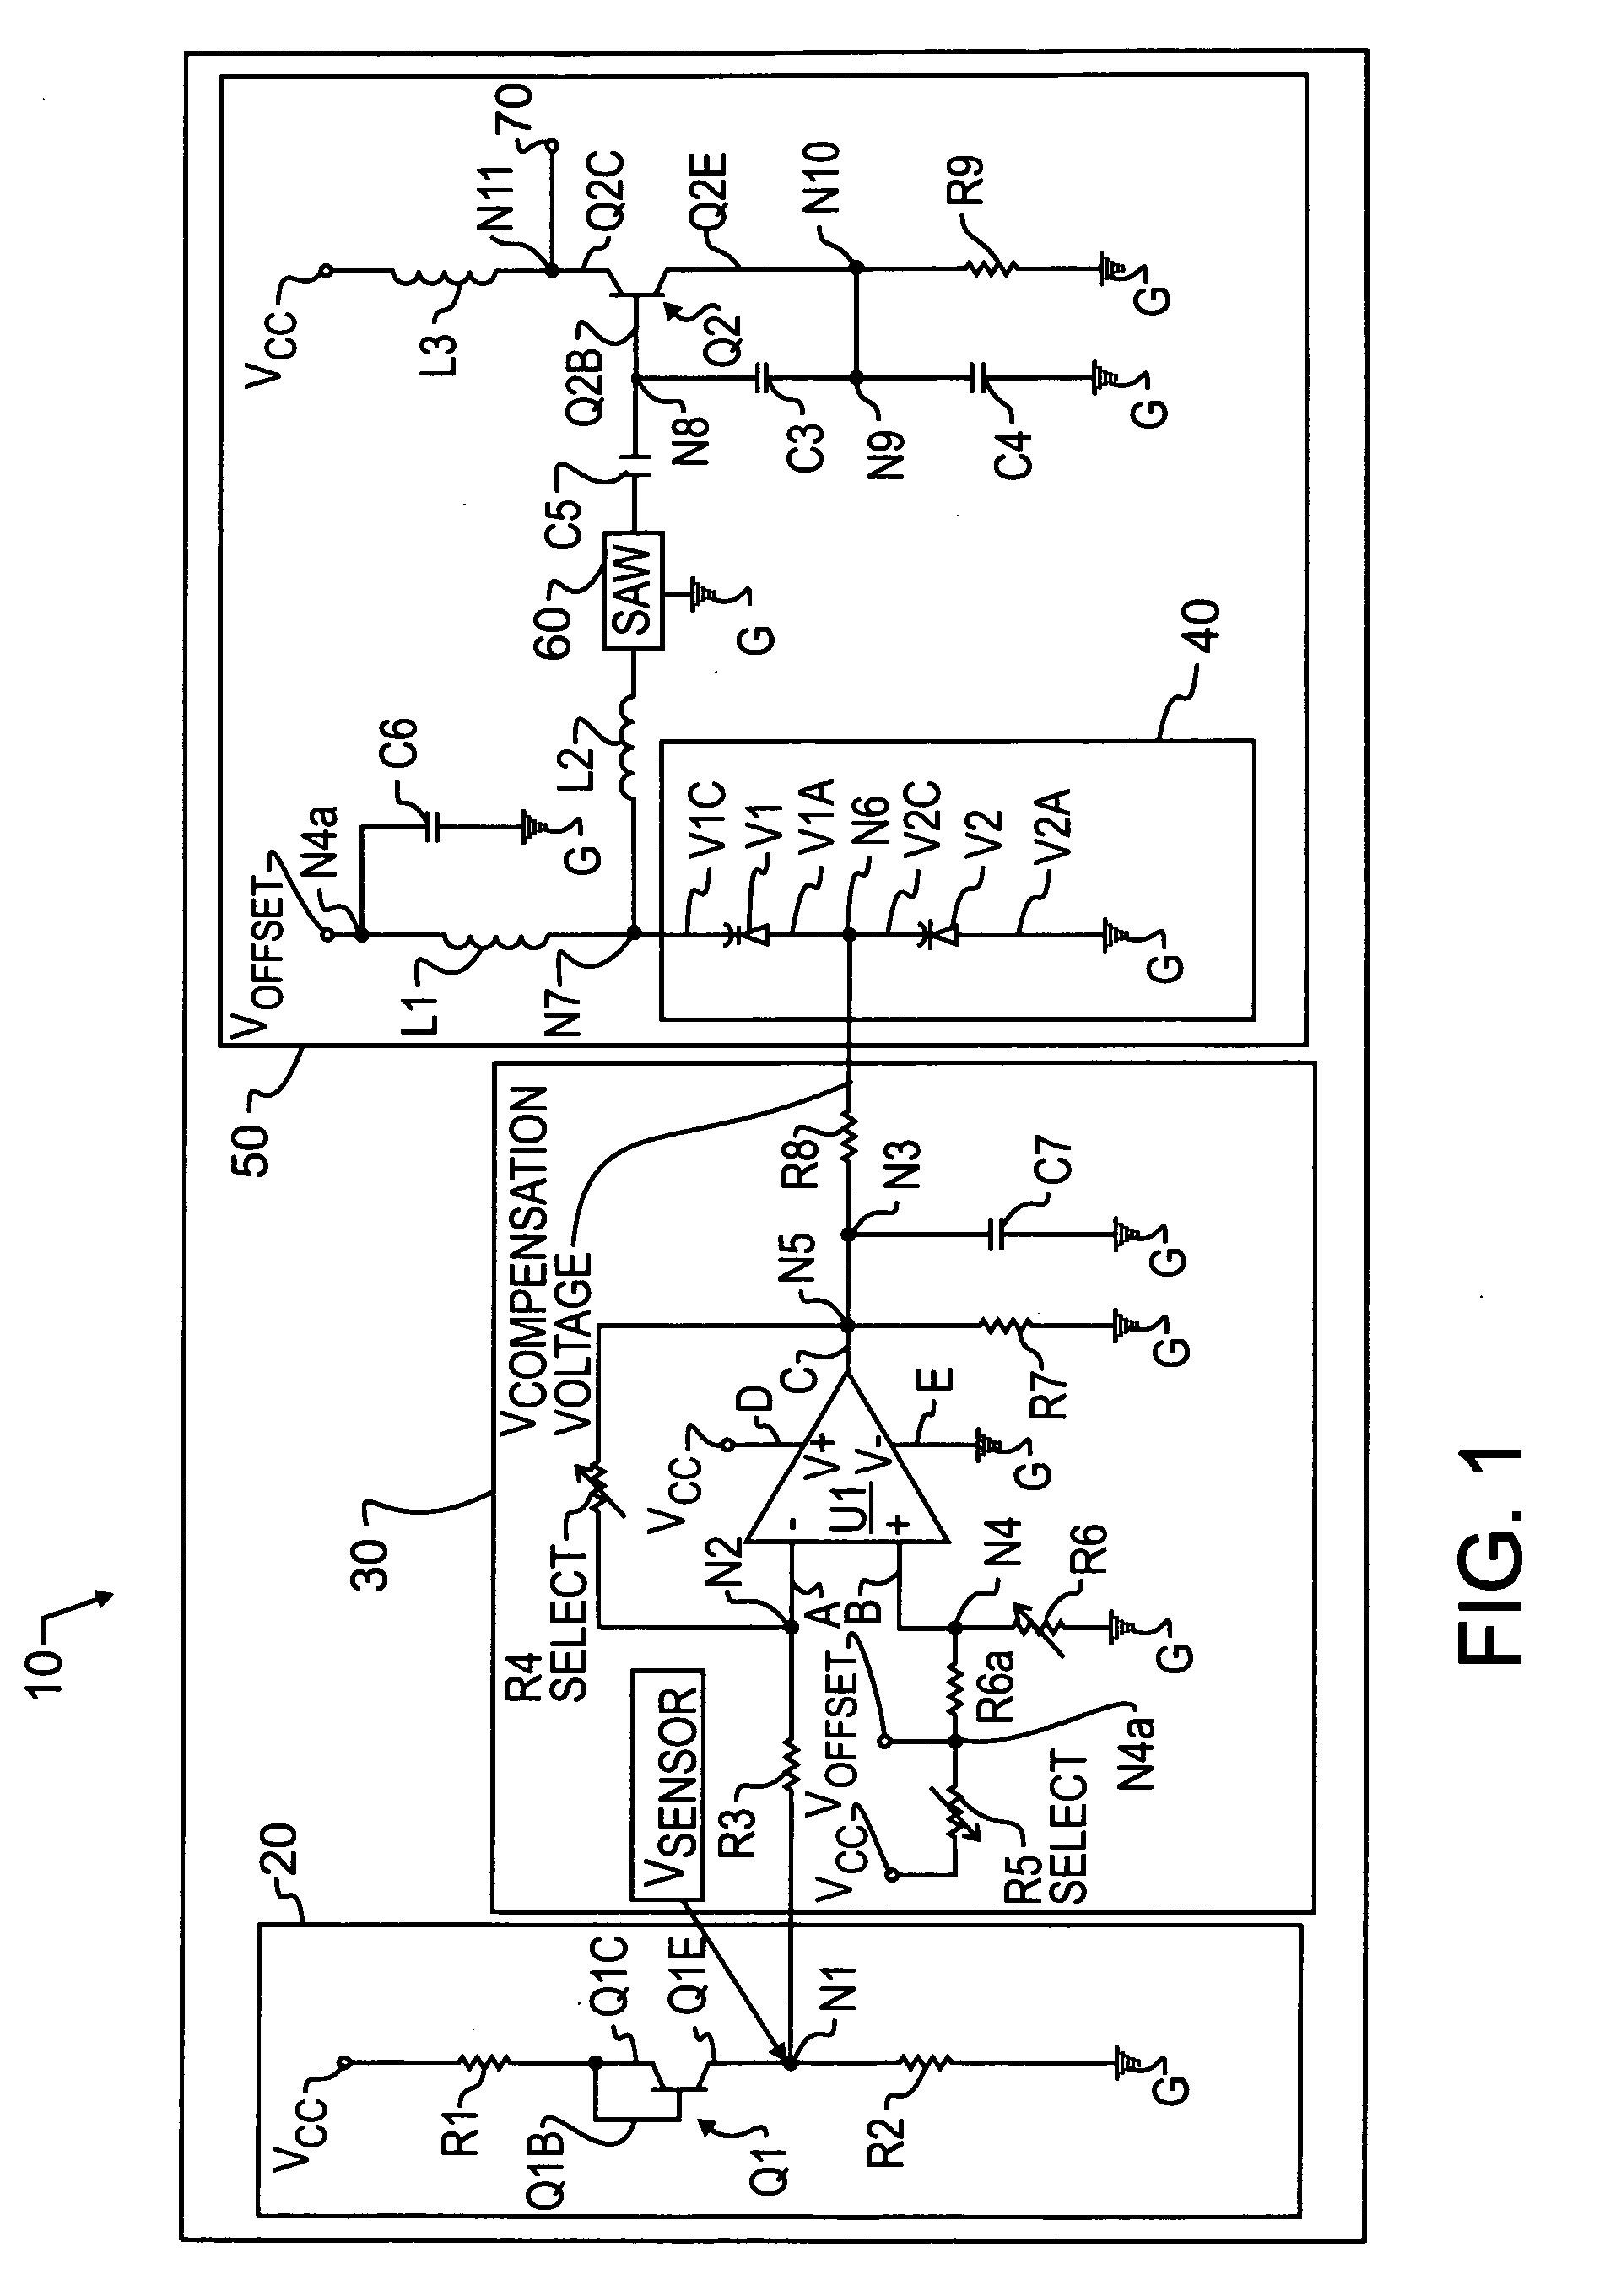 Temperature compensation circuit for a surface acoustic wave oscillator